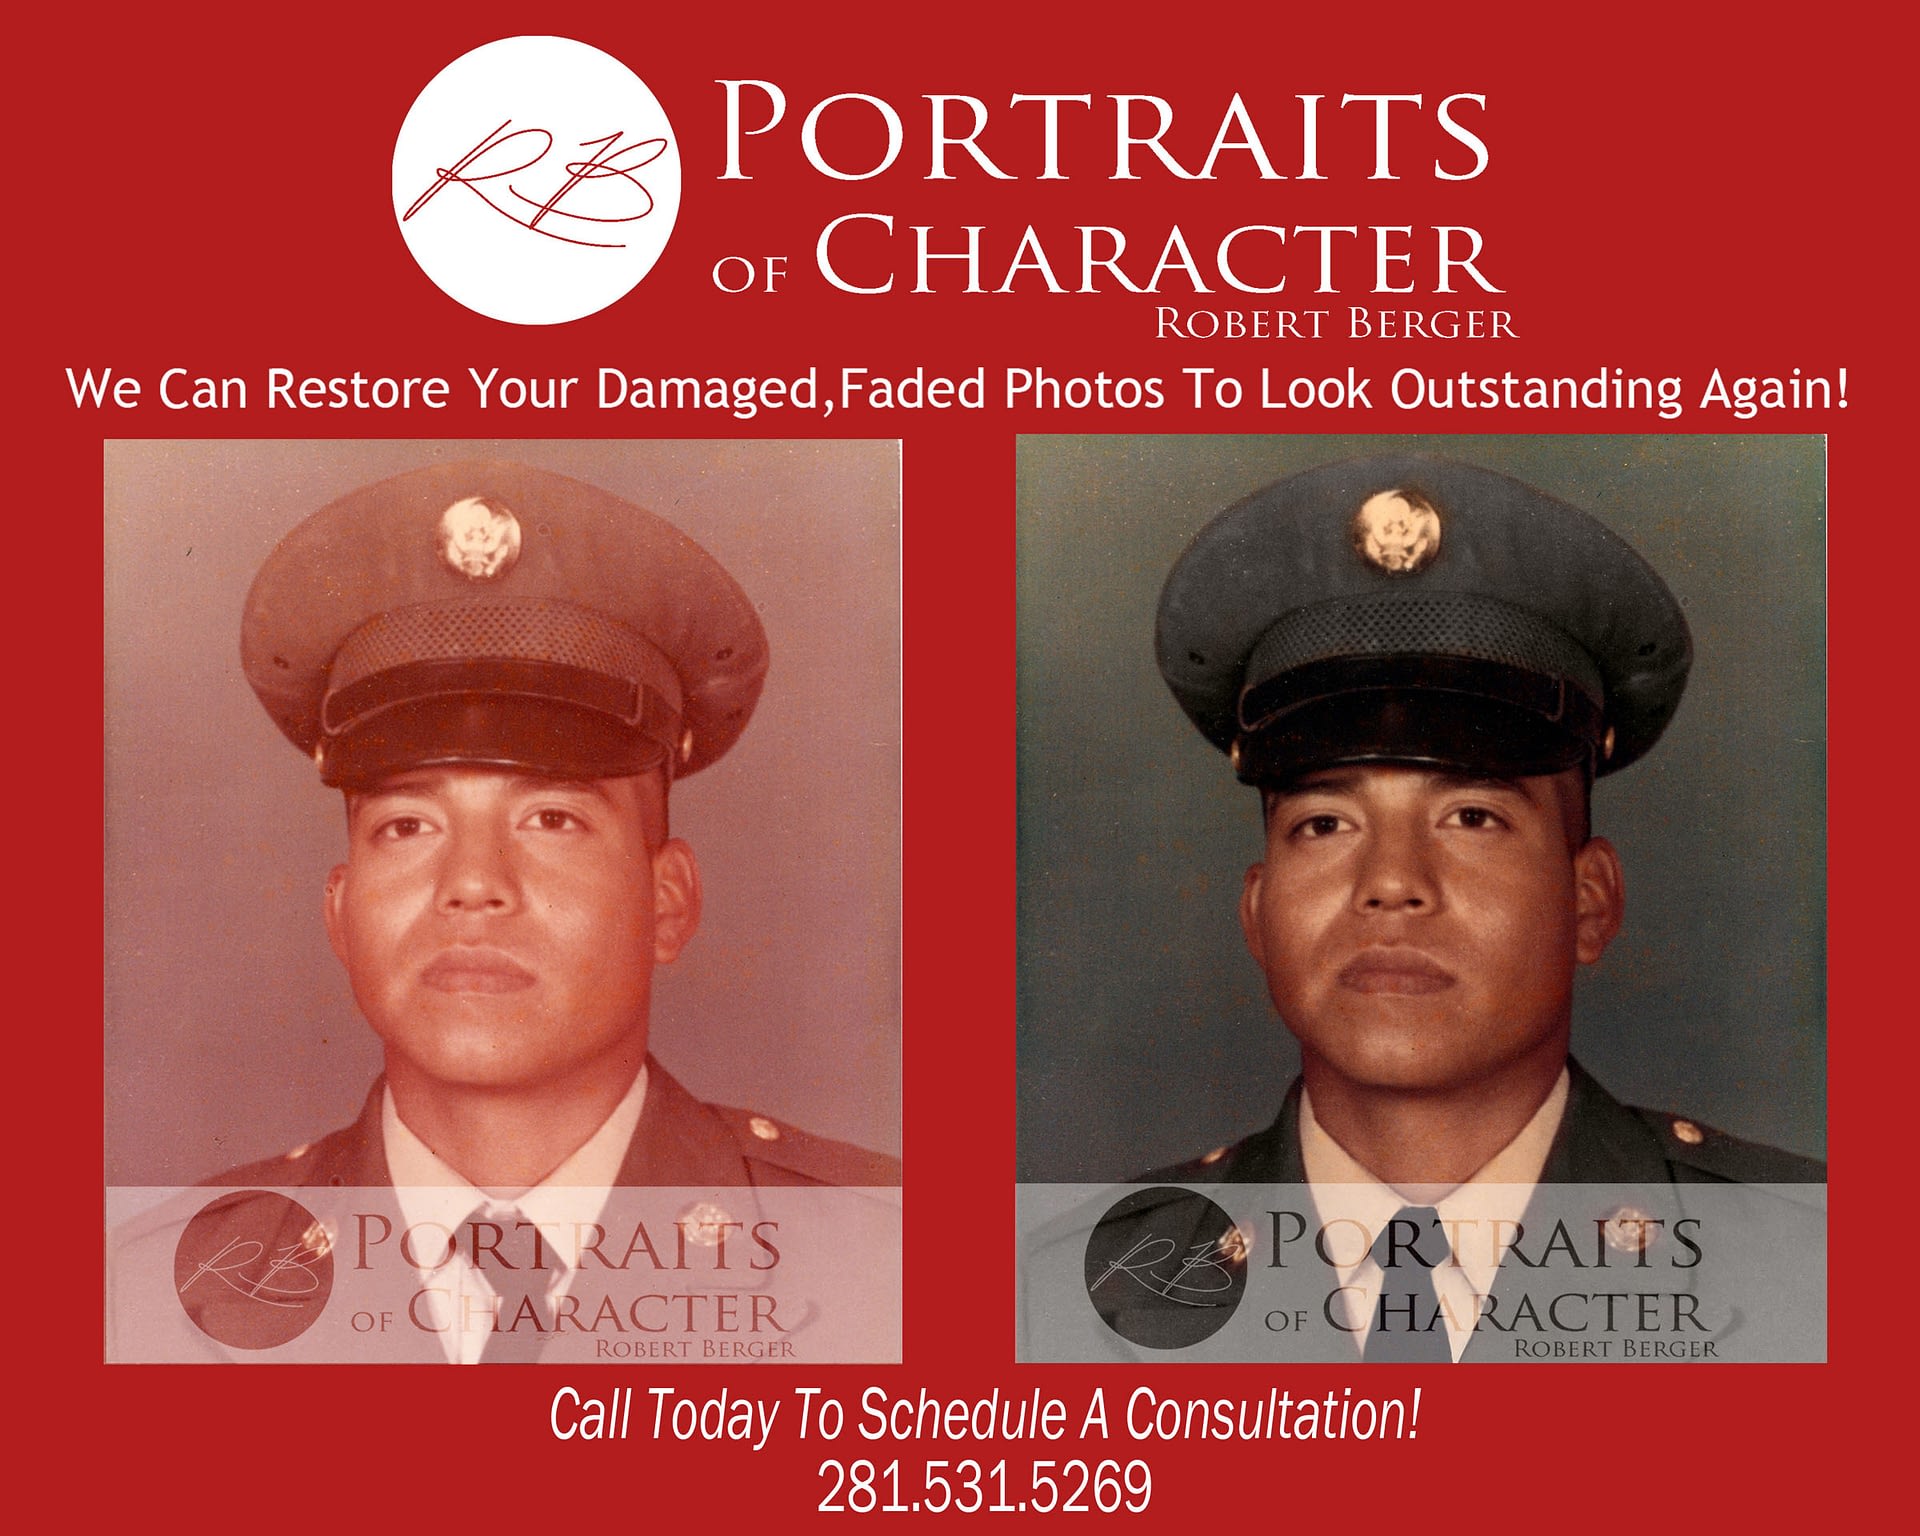 Houston Photo Restoration Picture Restoration- Finest Quality Old Photograph Restoration and Picture Restoration-Portraits of Character by Robert Berger